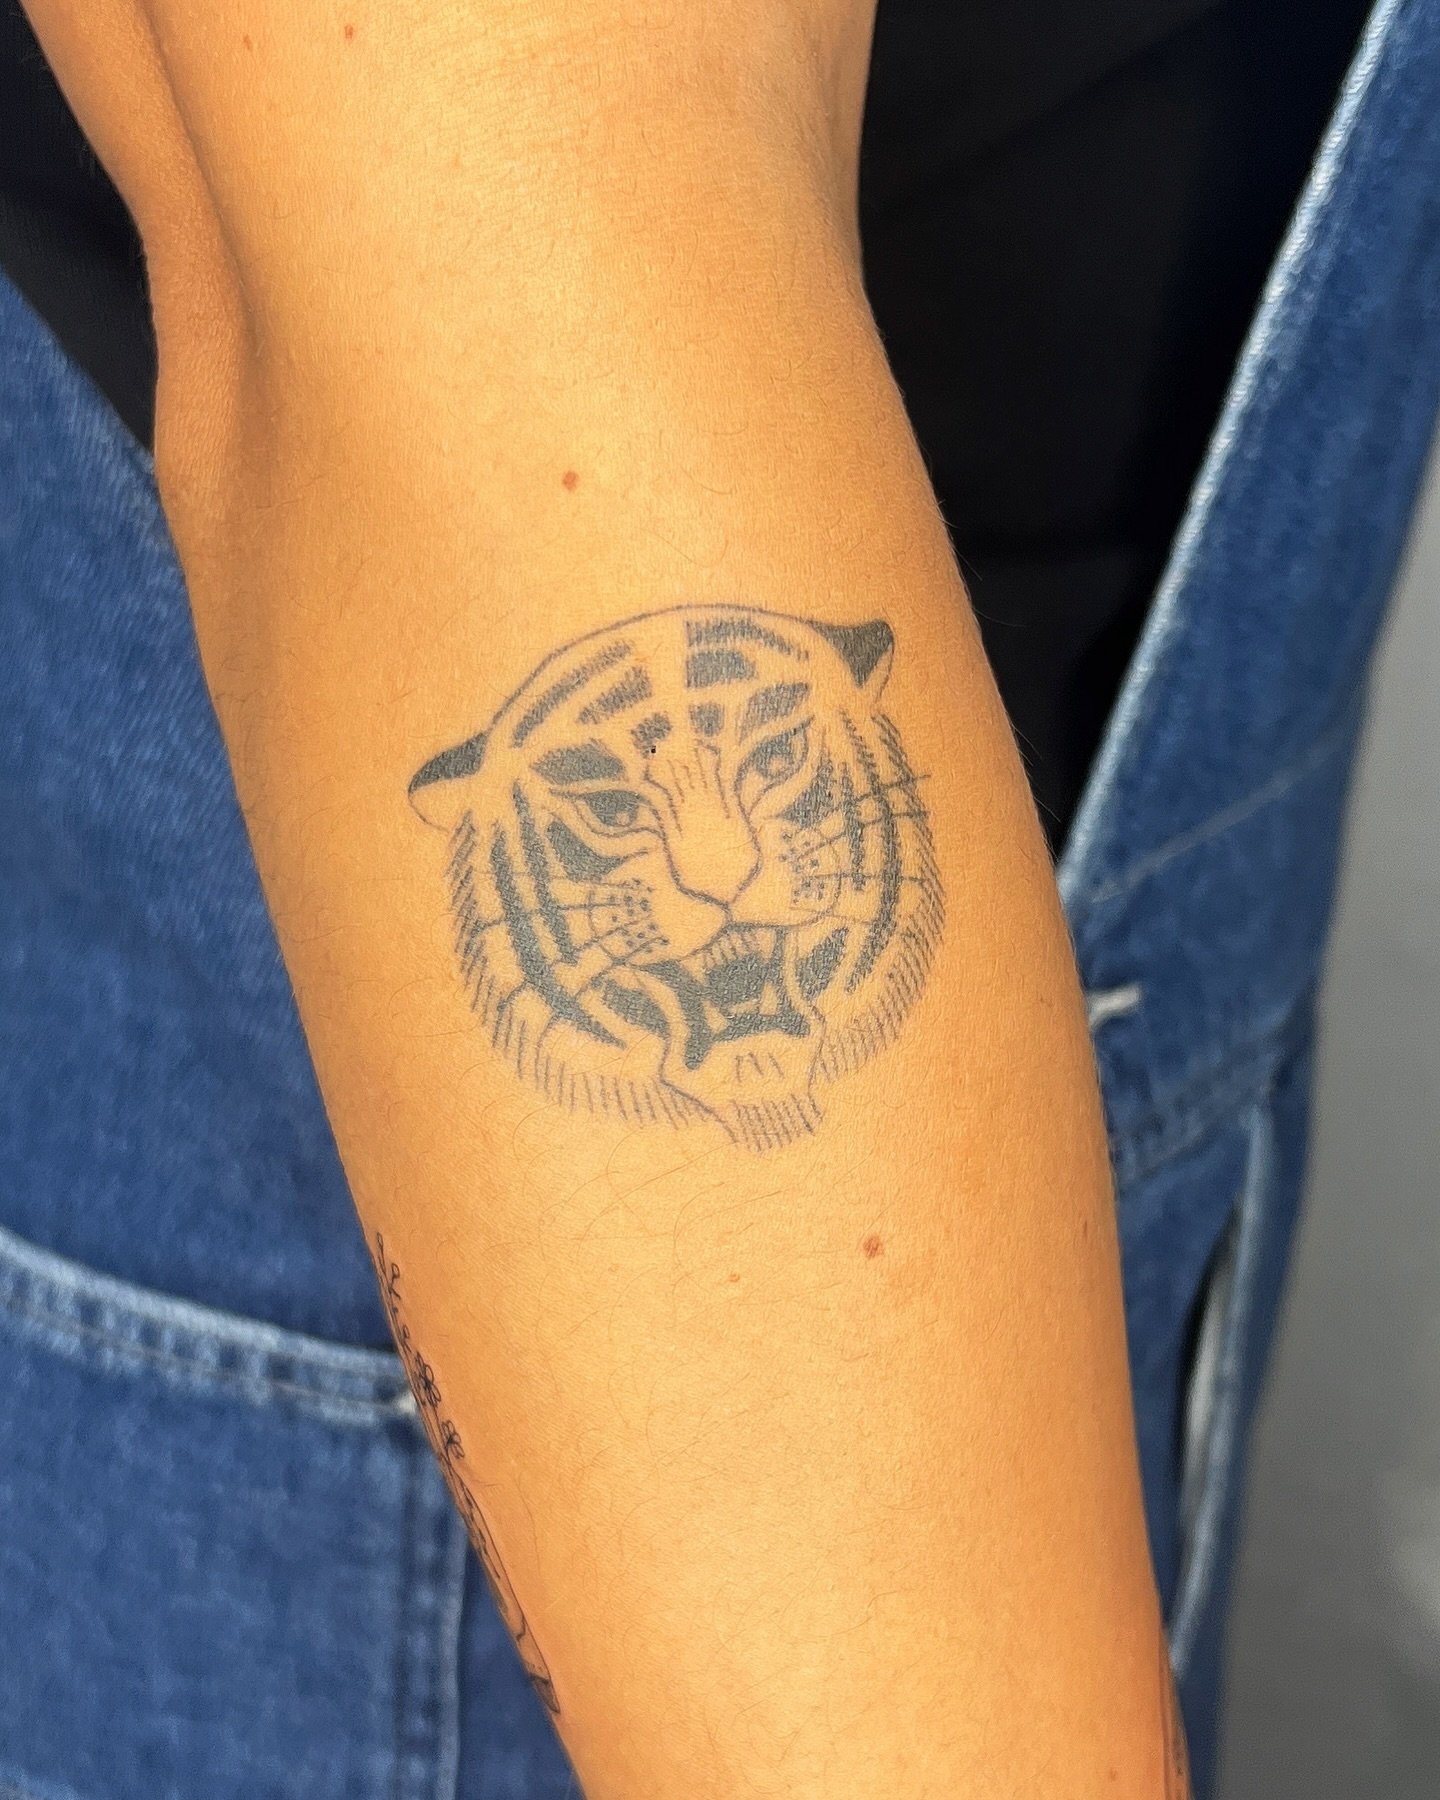 healed 🐯💞
done one year ago

⫸ 
Booking info: If you want to get inked, please stay patient. My books are closed. New dates will be announced in the beginning of June 🫶🏻 #nodms 

#frauinestattoo #tigertattoo